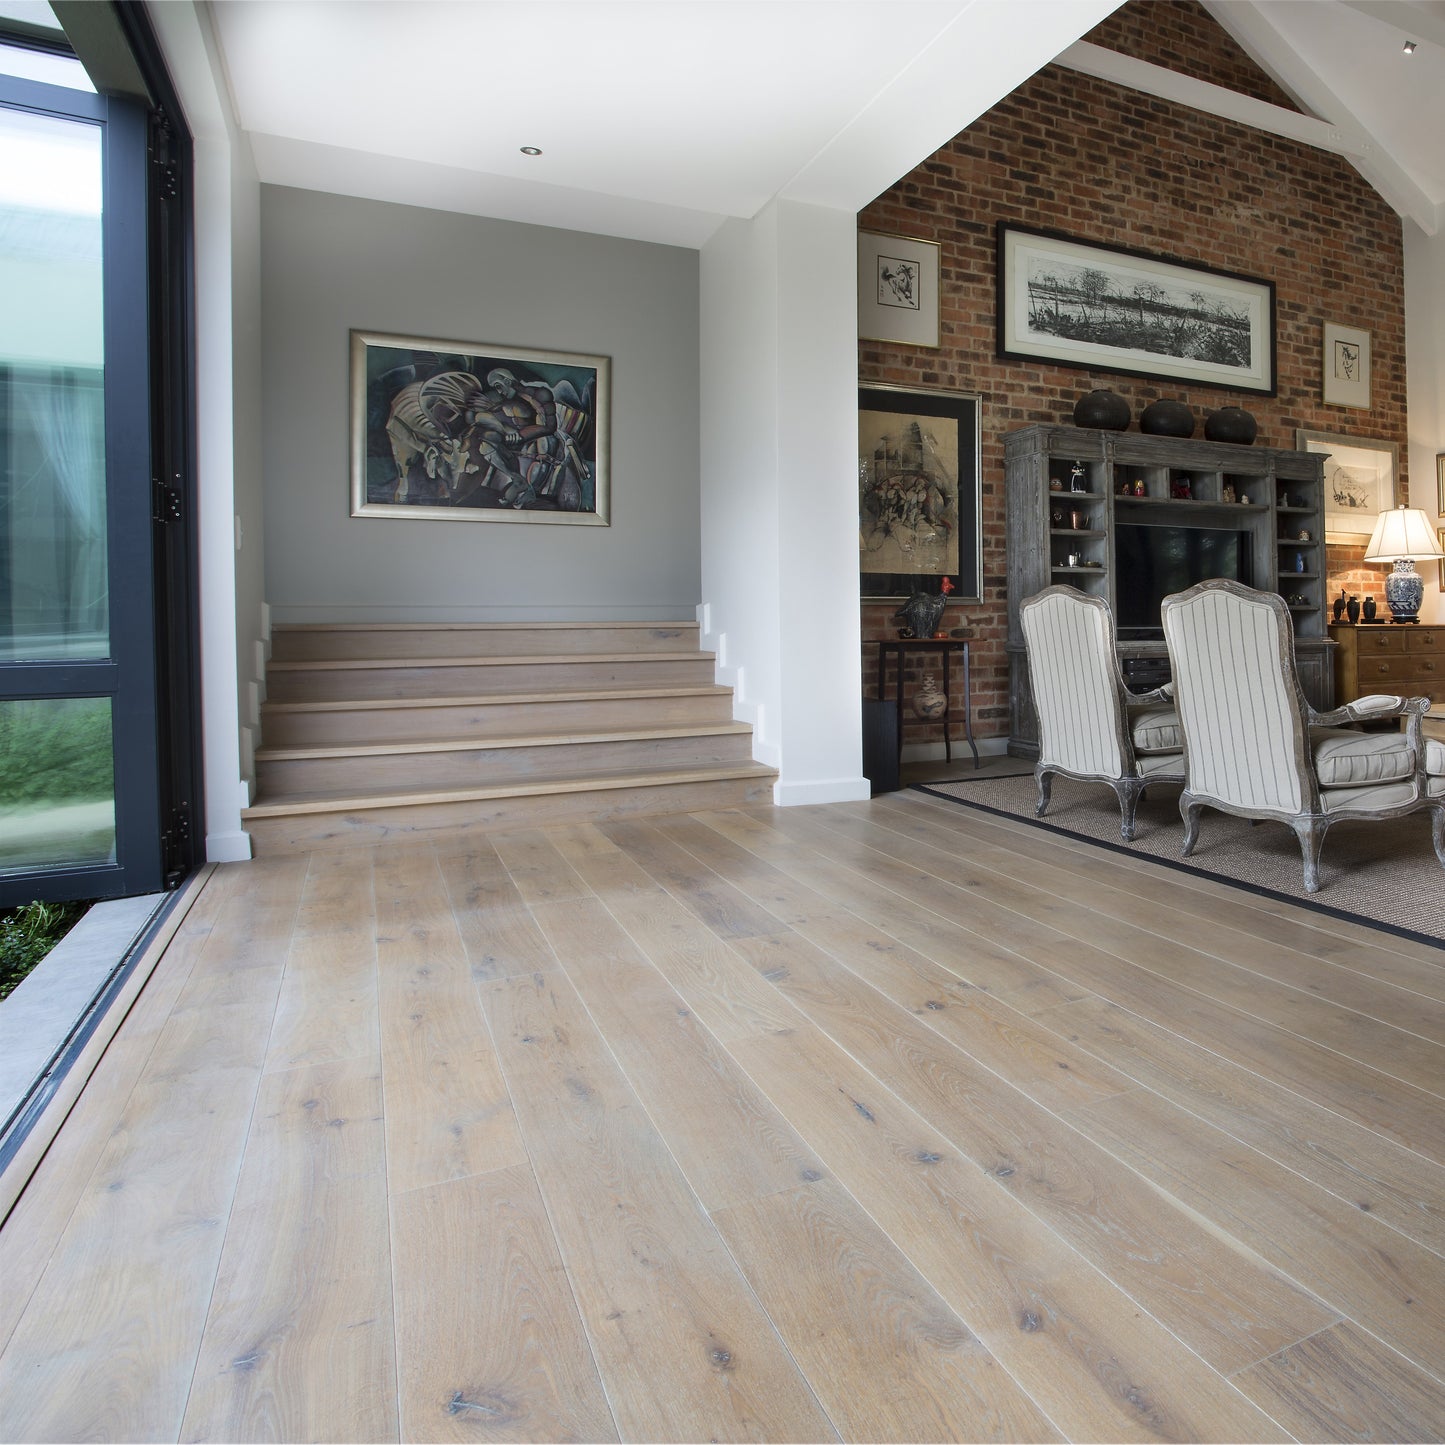 Cord Finish Engineered Oak by Hard Decor available in Herringbone, wide plank, Classic and Prime AB